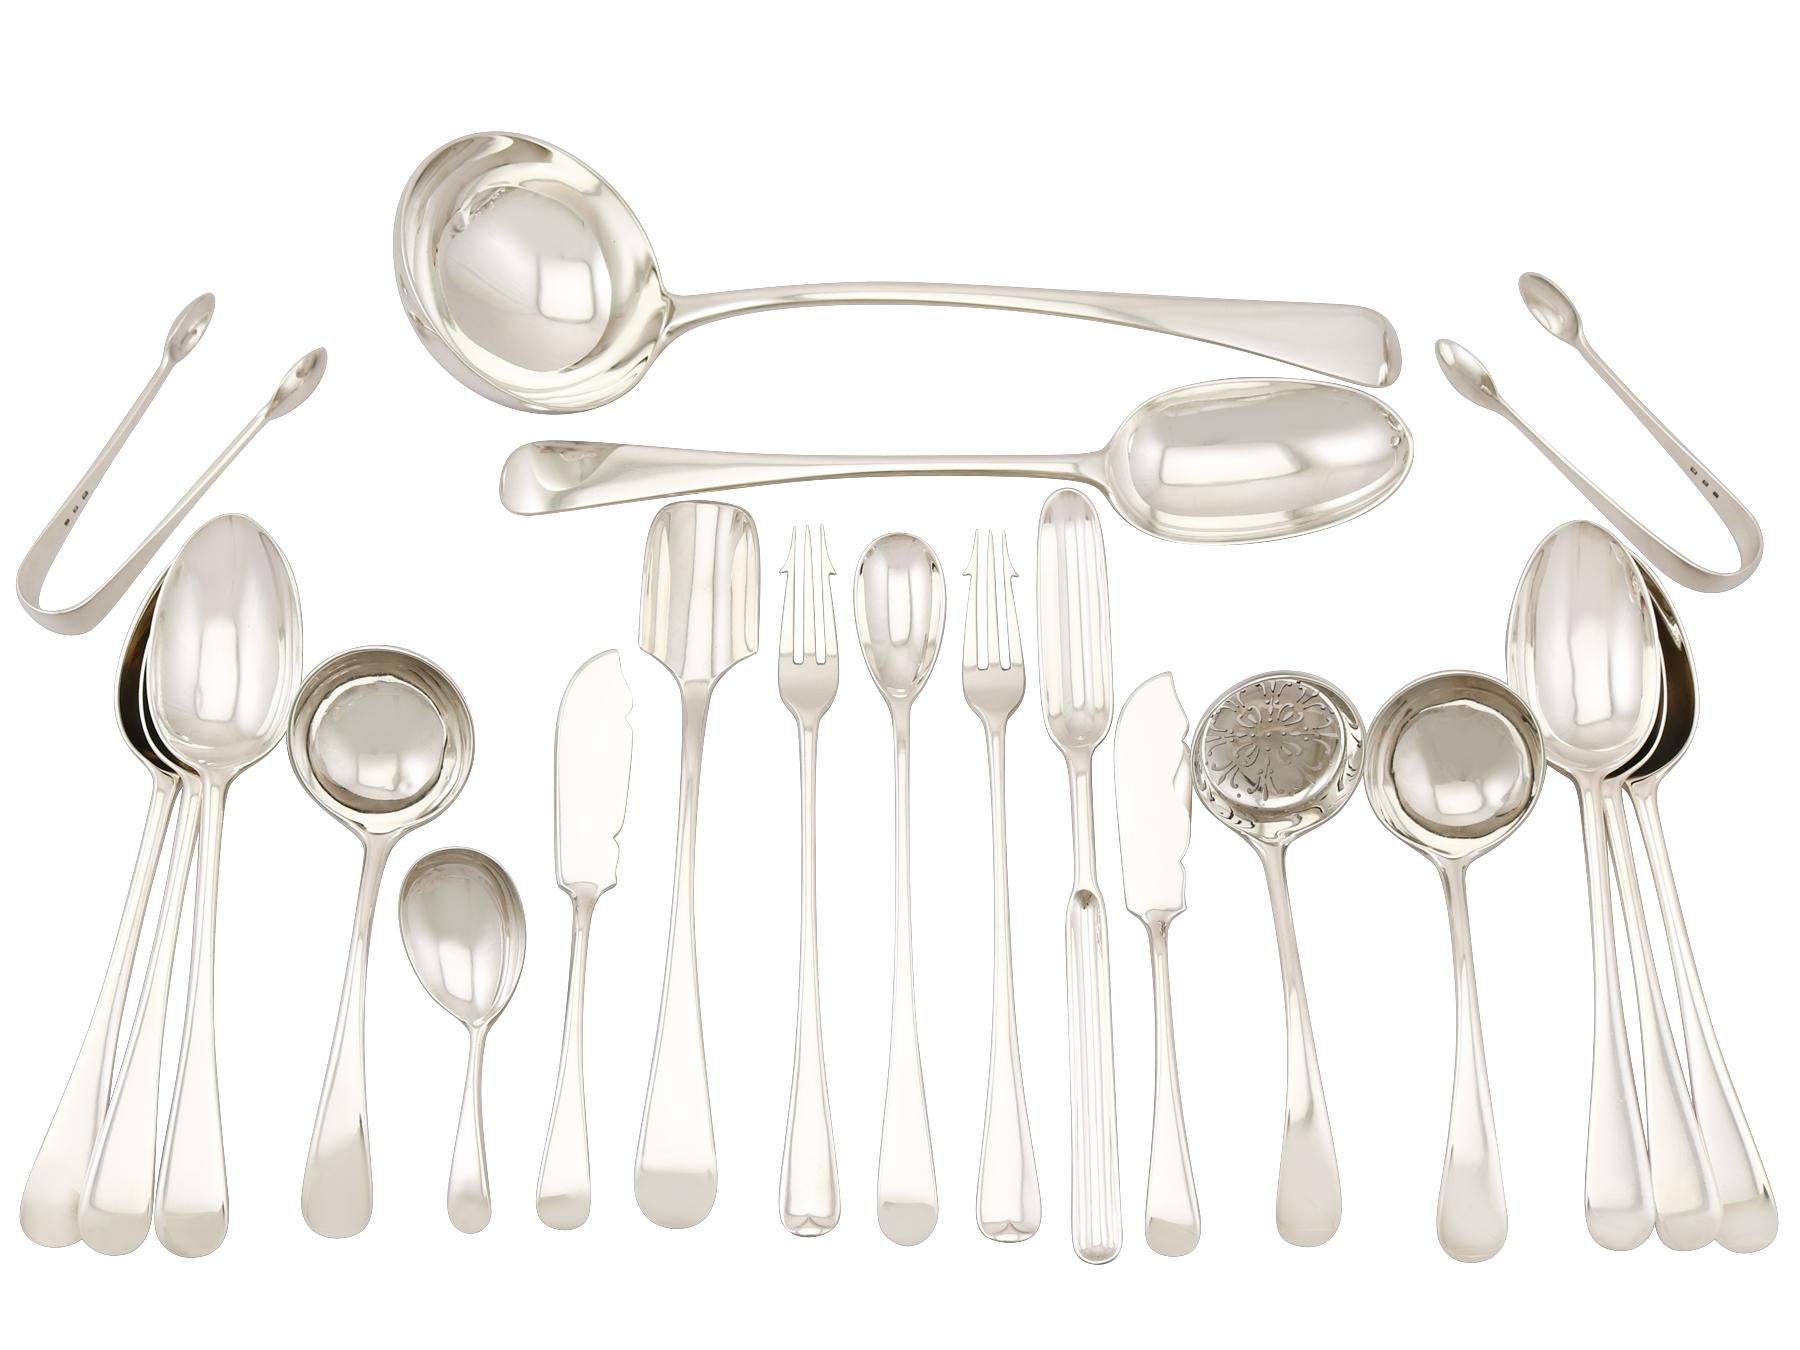 An exceptional, fine and impressive, comprehensive antique English sterling silver Old English pattern canteen of cutlery for twelve persons, an addition to our antique flatware sets.

The pieces of this exceptional antique George V sterling